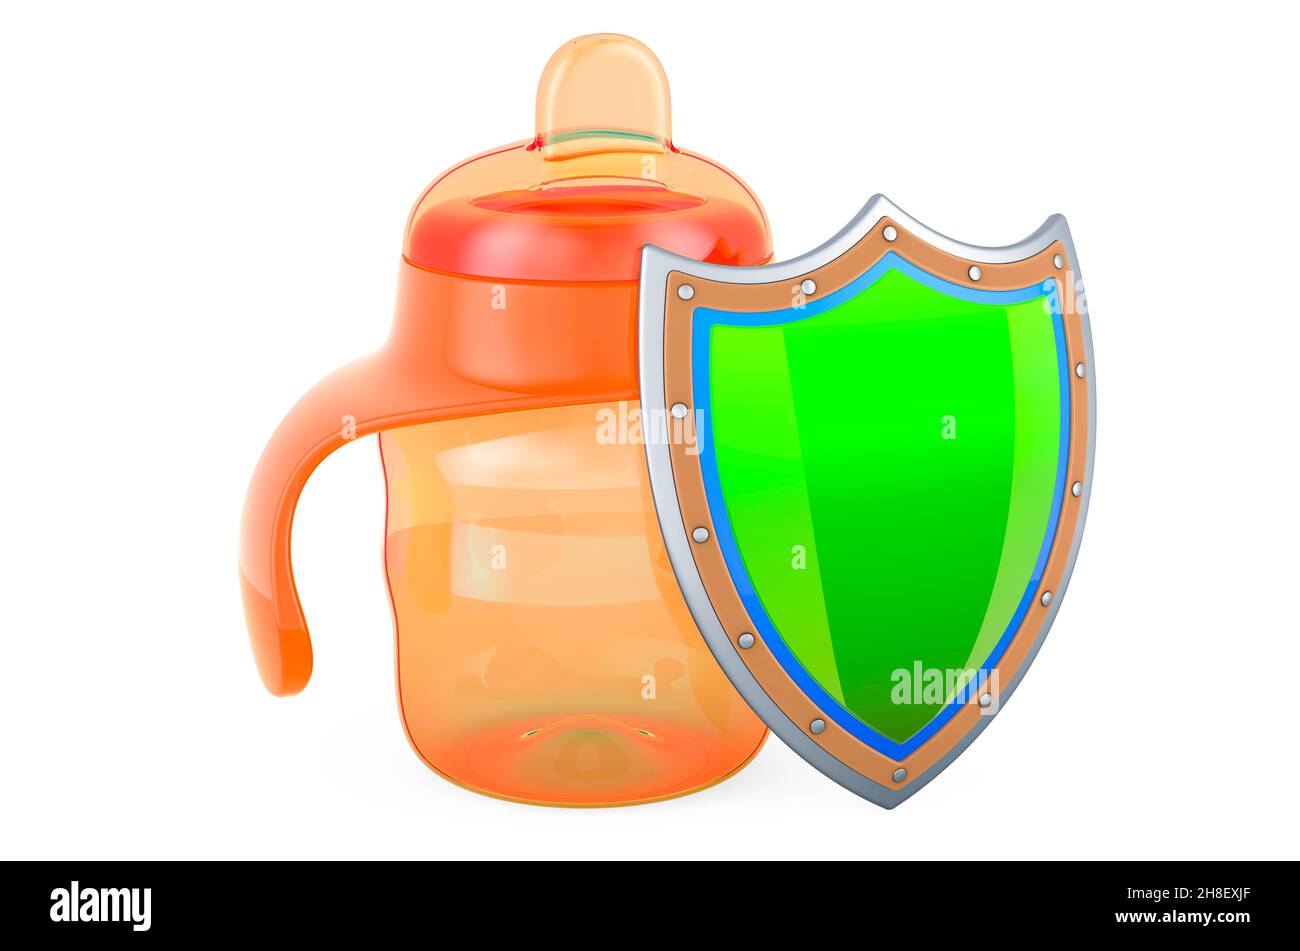 https://c8.alamy.com/comp/2H8EXJF/non-spill-kids-cup-with-shield-3d-rendering-isolated-on-white-background-2H8EXJF.jpg